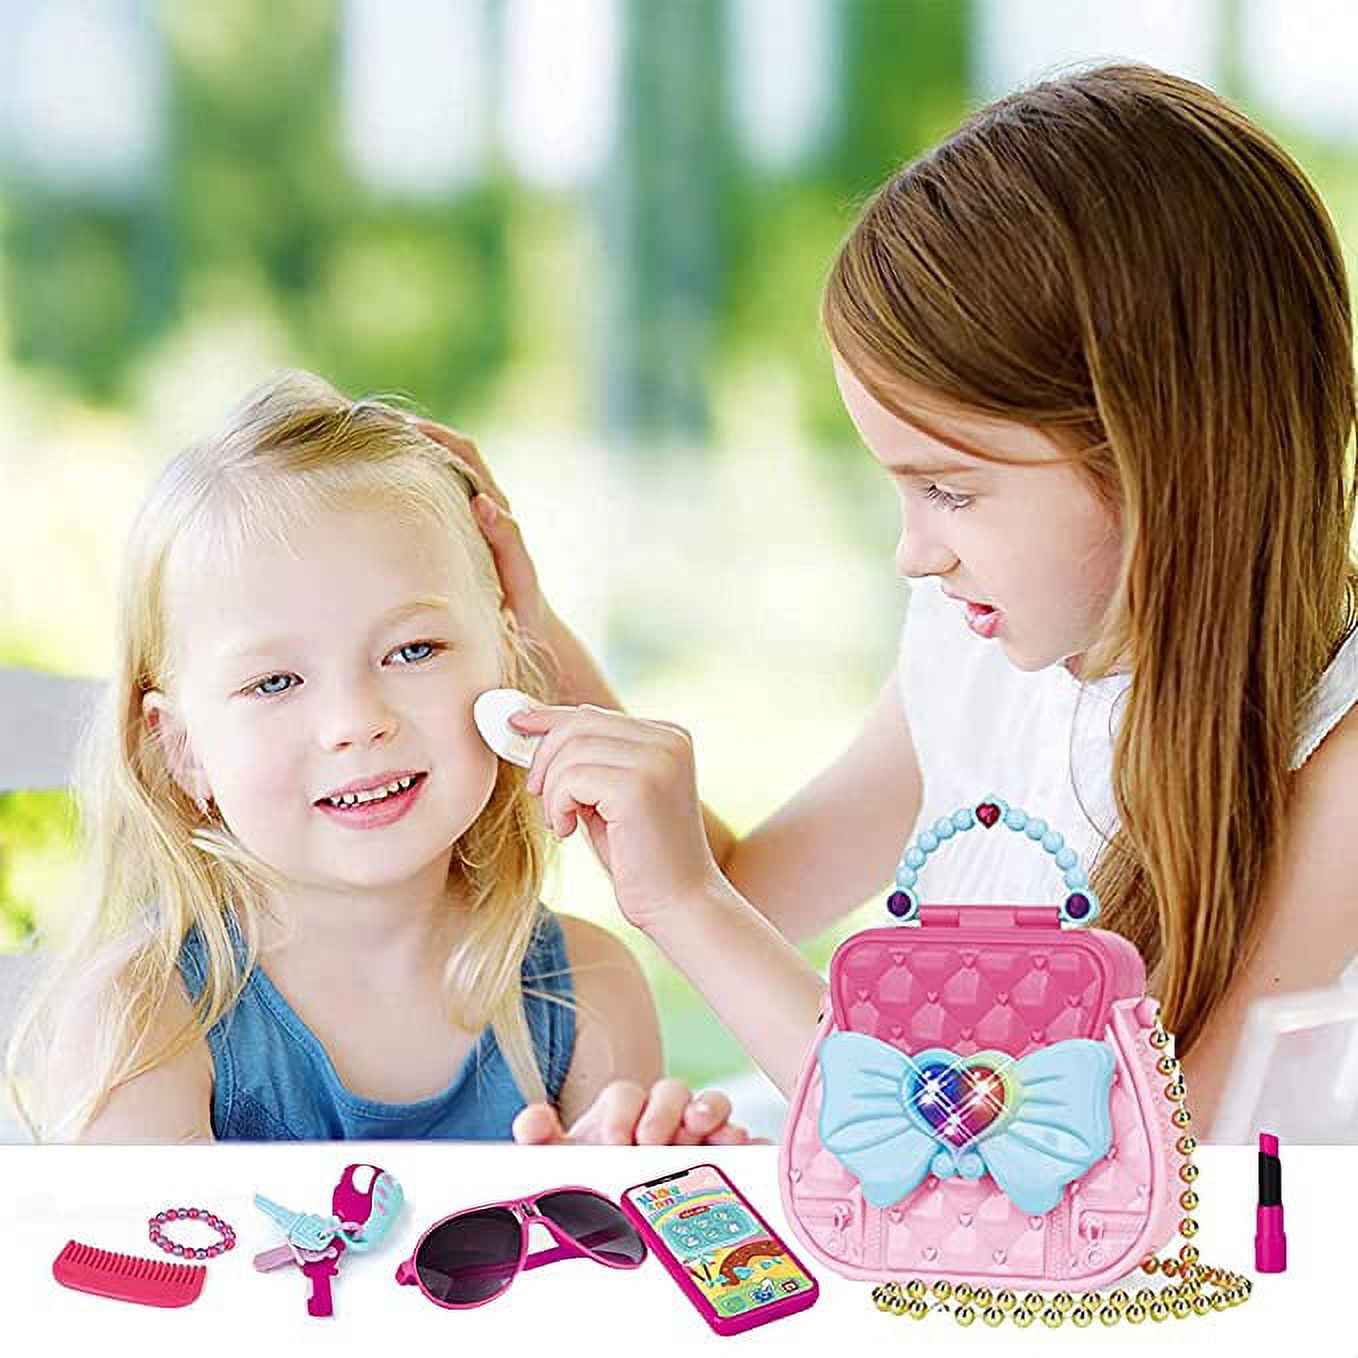 Play Purse for Little Girls, Toddler Makeup Kit, Kids Purse Toy, Play Make  up Set for Girls, Princess Gift for Age 3 + Years Old - Walmart.com